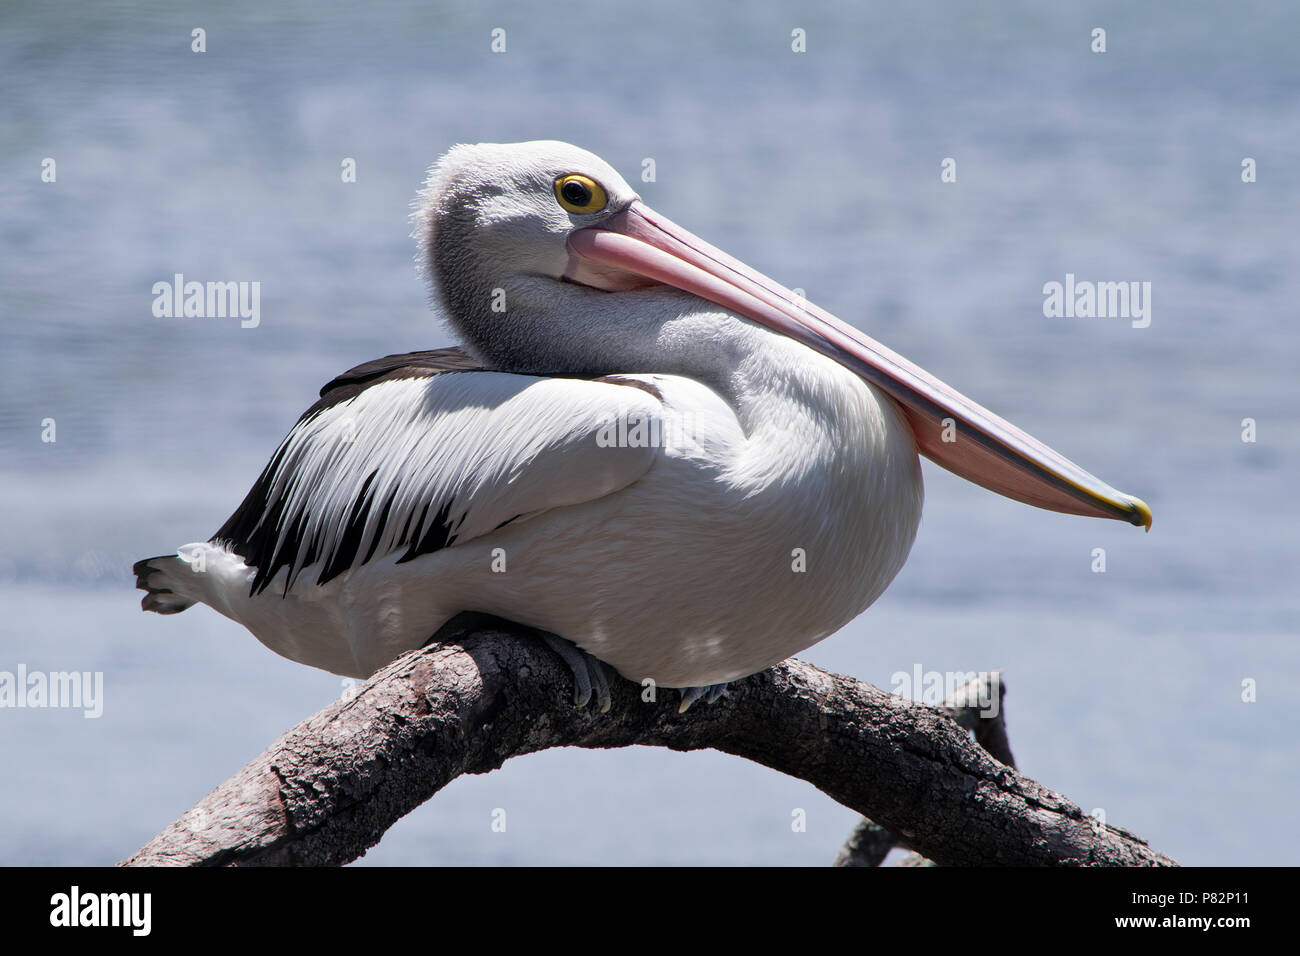 Australian pelican on the twig in the wilderness Stock Photo